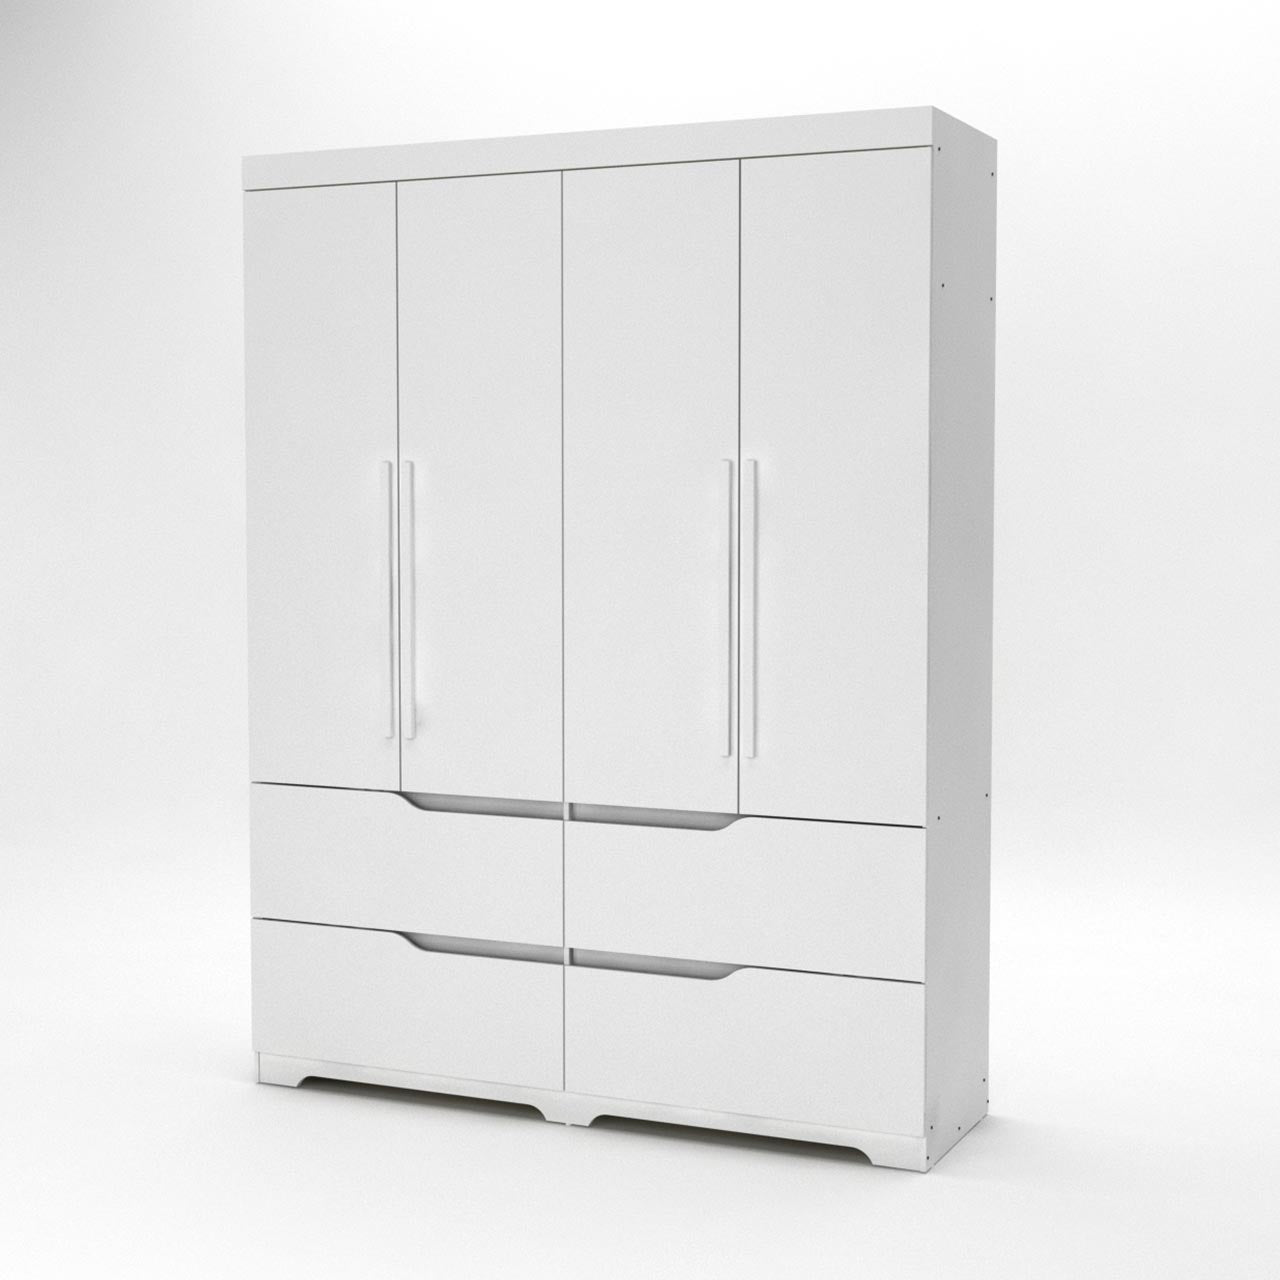 Modern 4 Door Wardrobe – Available In 2 Colours